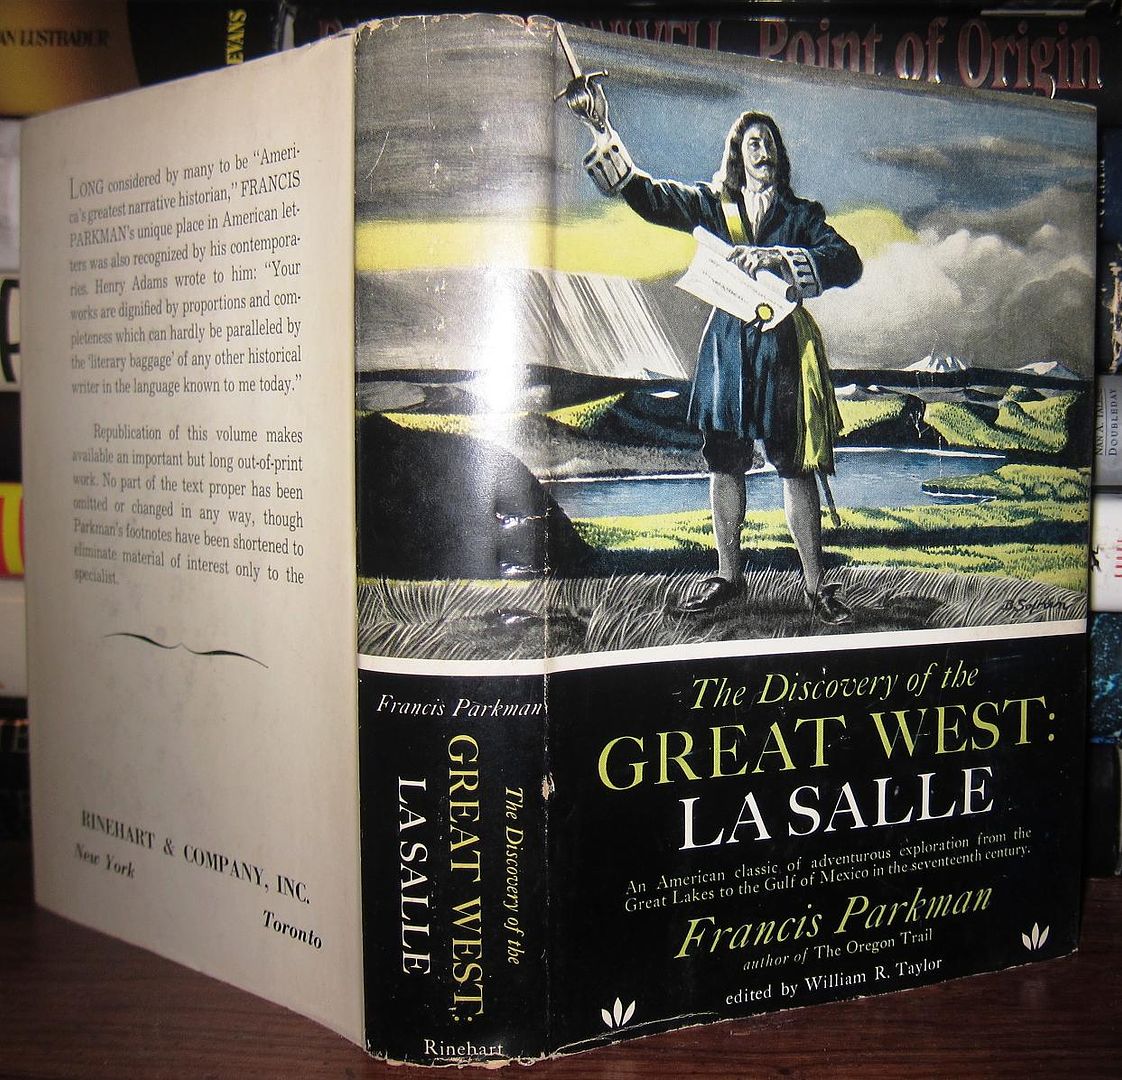 PARKMAN, FRANCIS AND TAYLOR, WILLIAM R. - The Discovery of the Great West la Salle